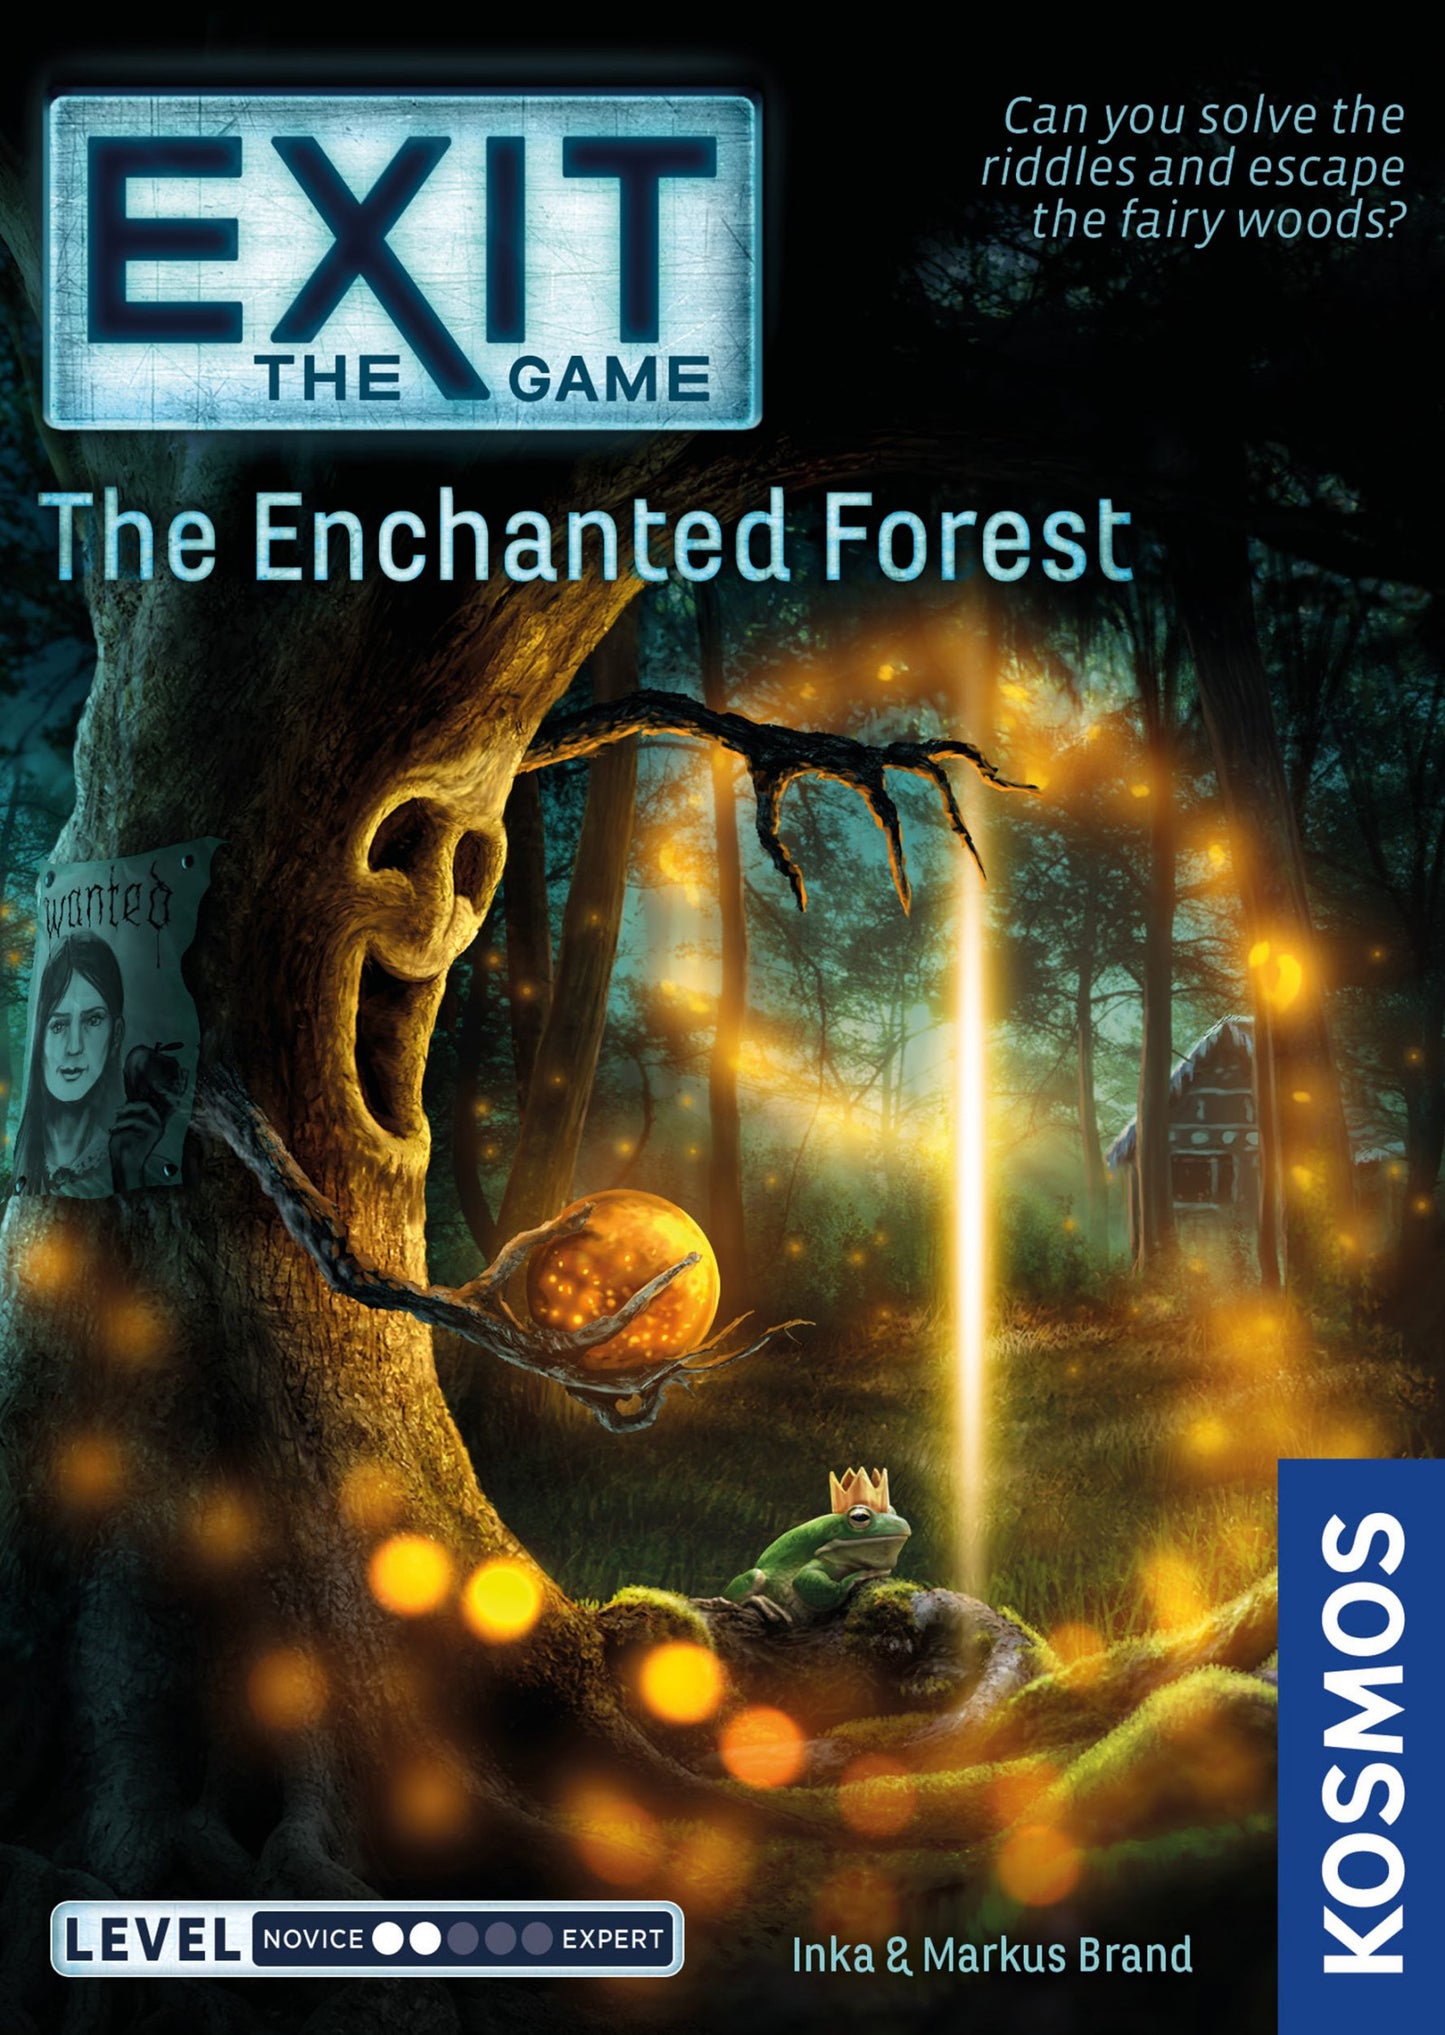 Exit the Game the Enchanted Forest